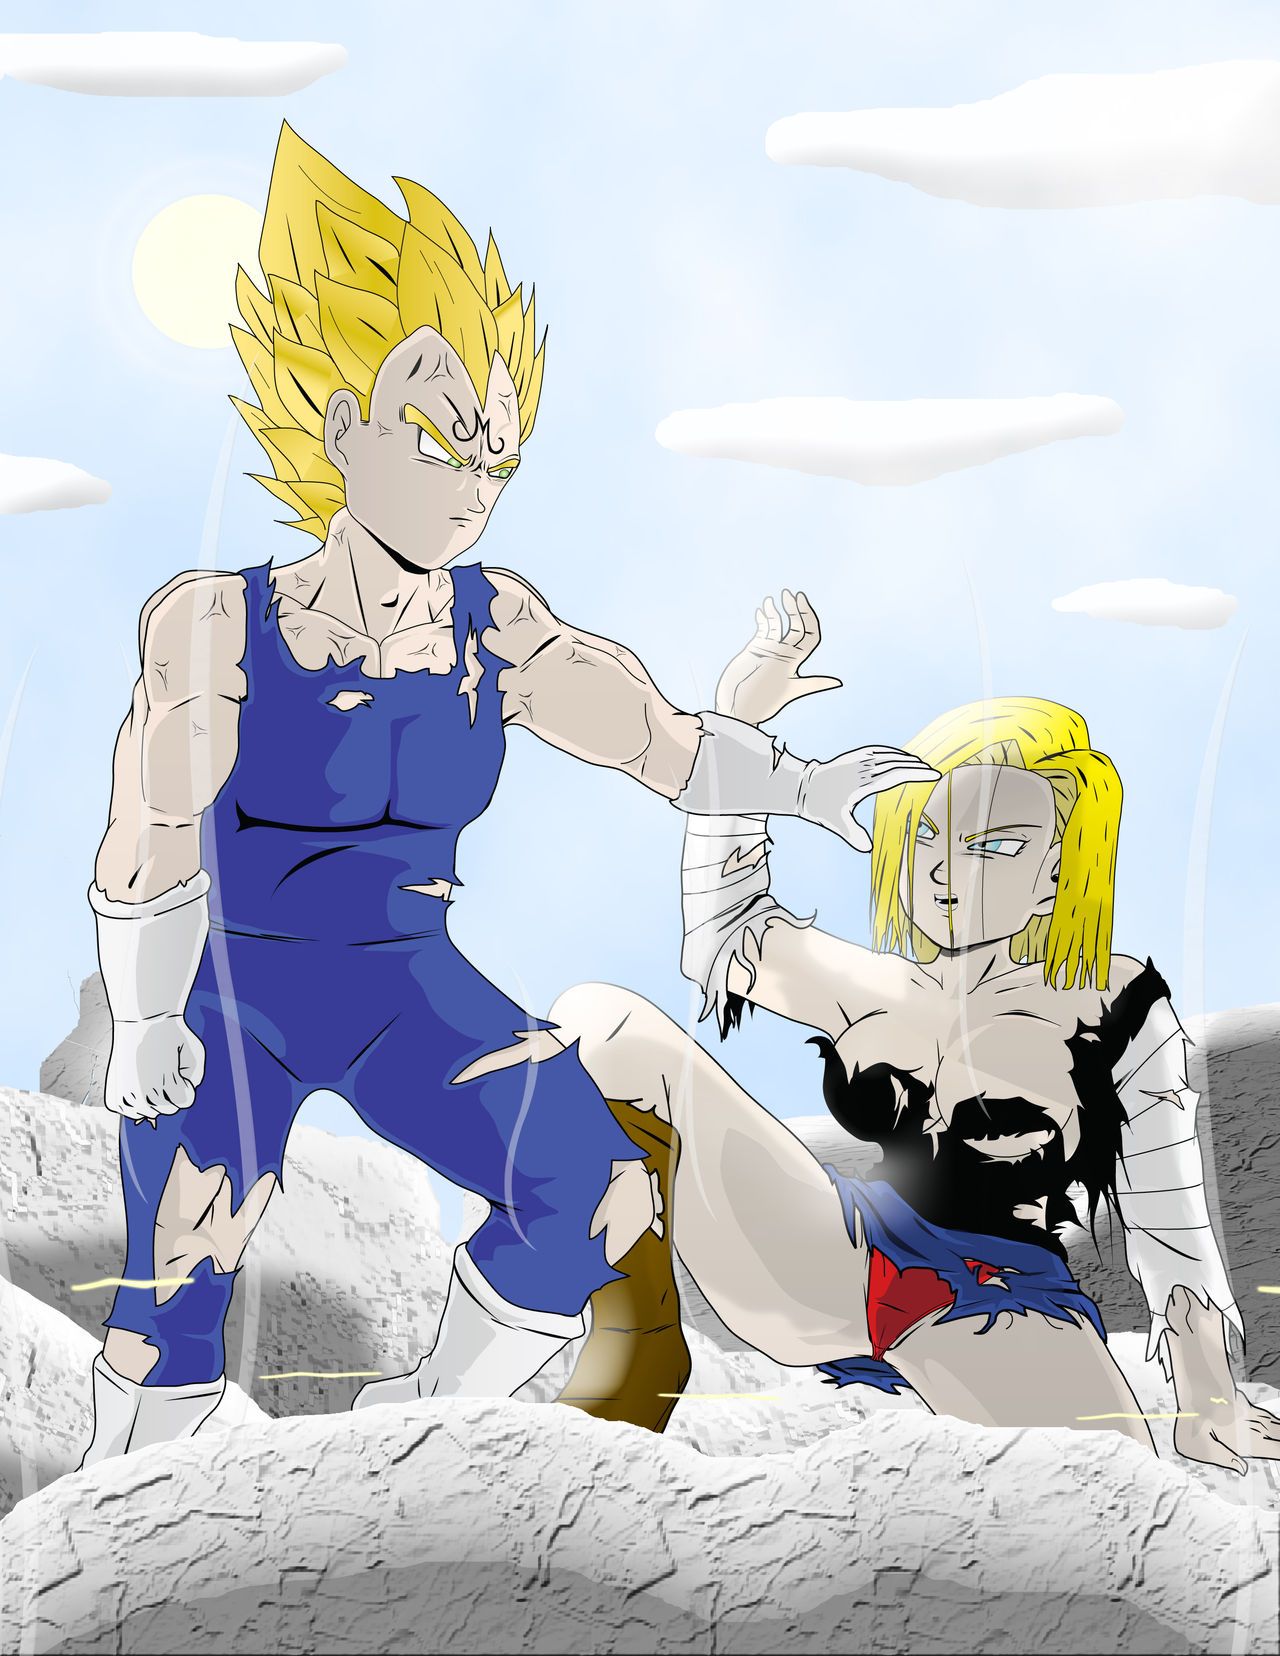 [Rotceh1] Training of Chichi (Dragon Ball Z) [Ongoing] 8